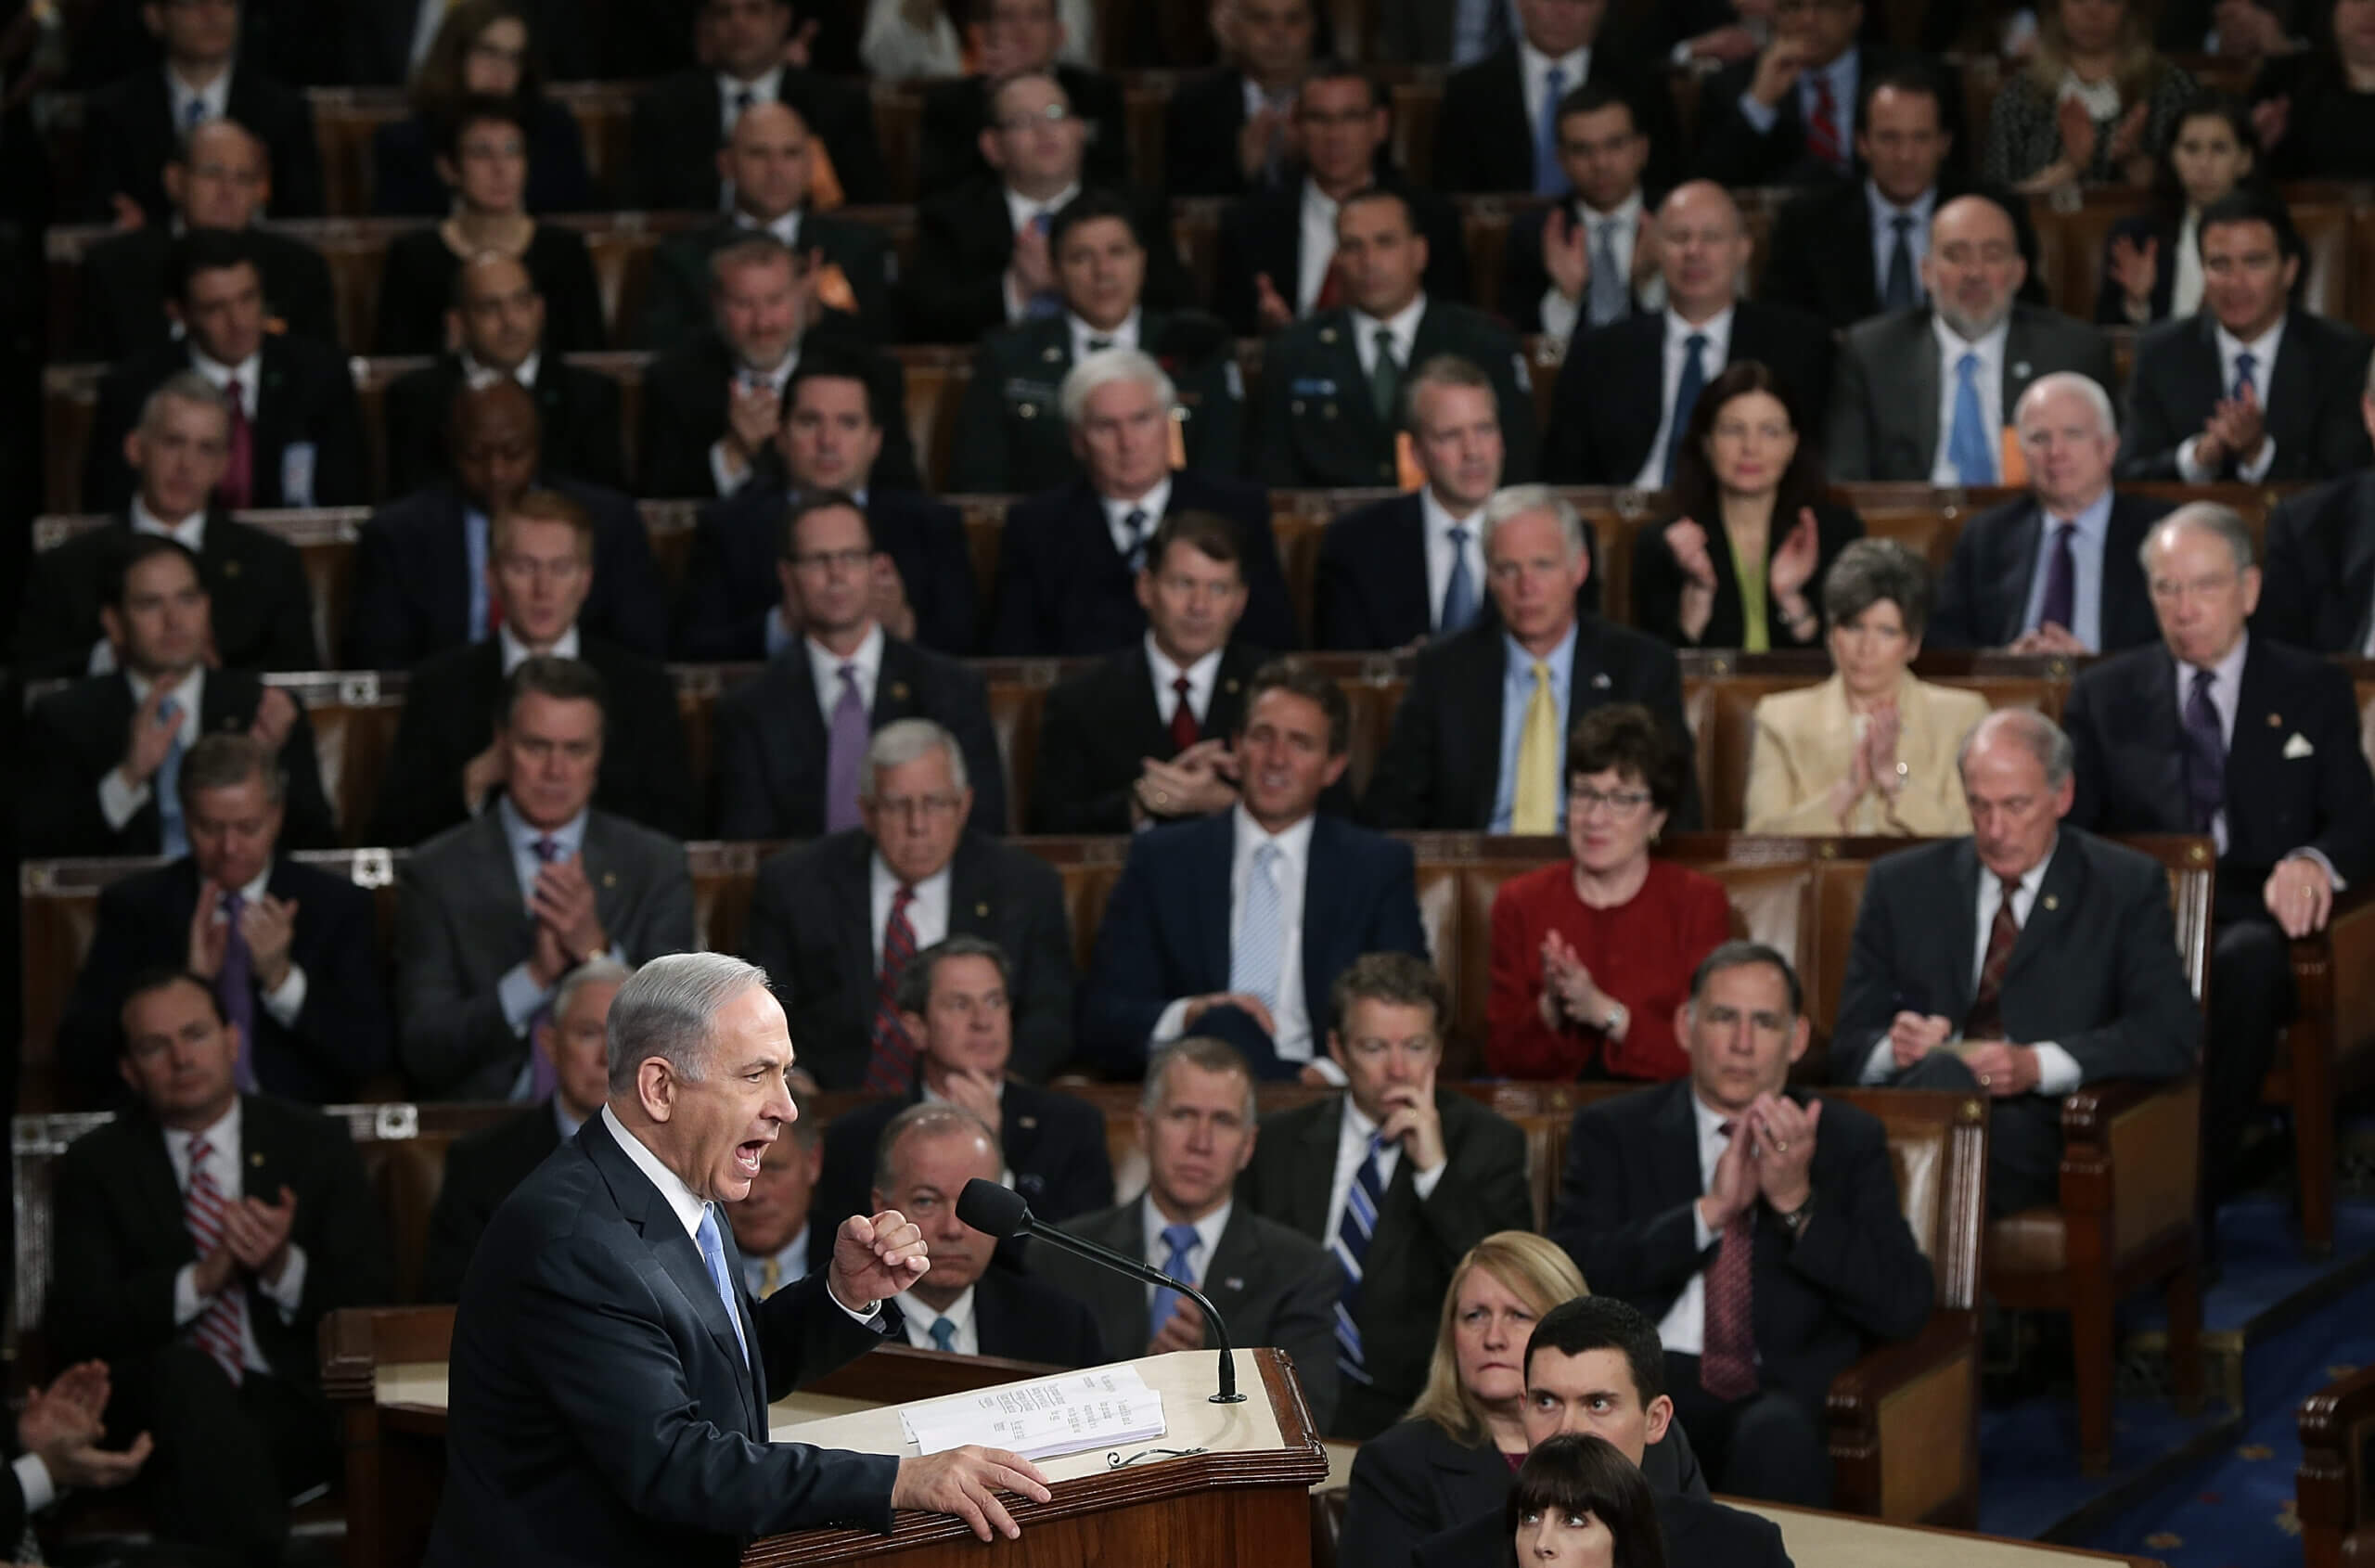 Netanyahu's speech: Some members of Congress will boycott. Who else have they snubbed?